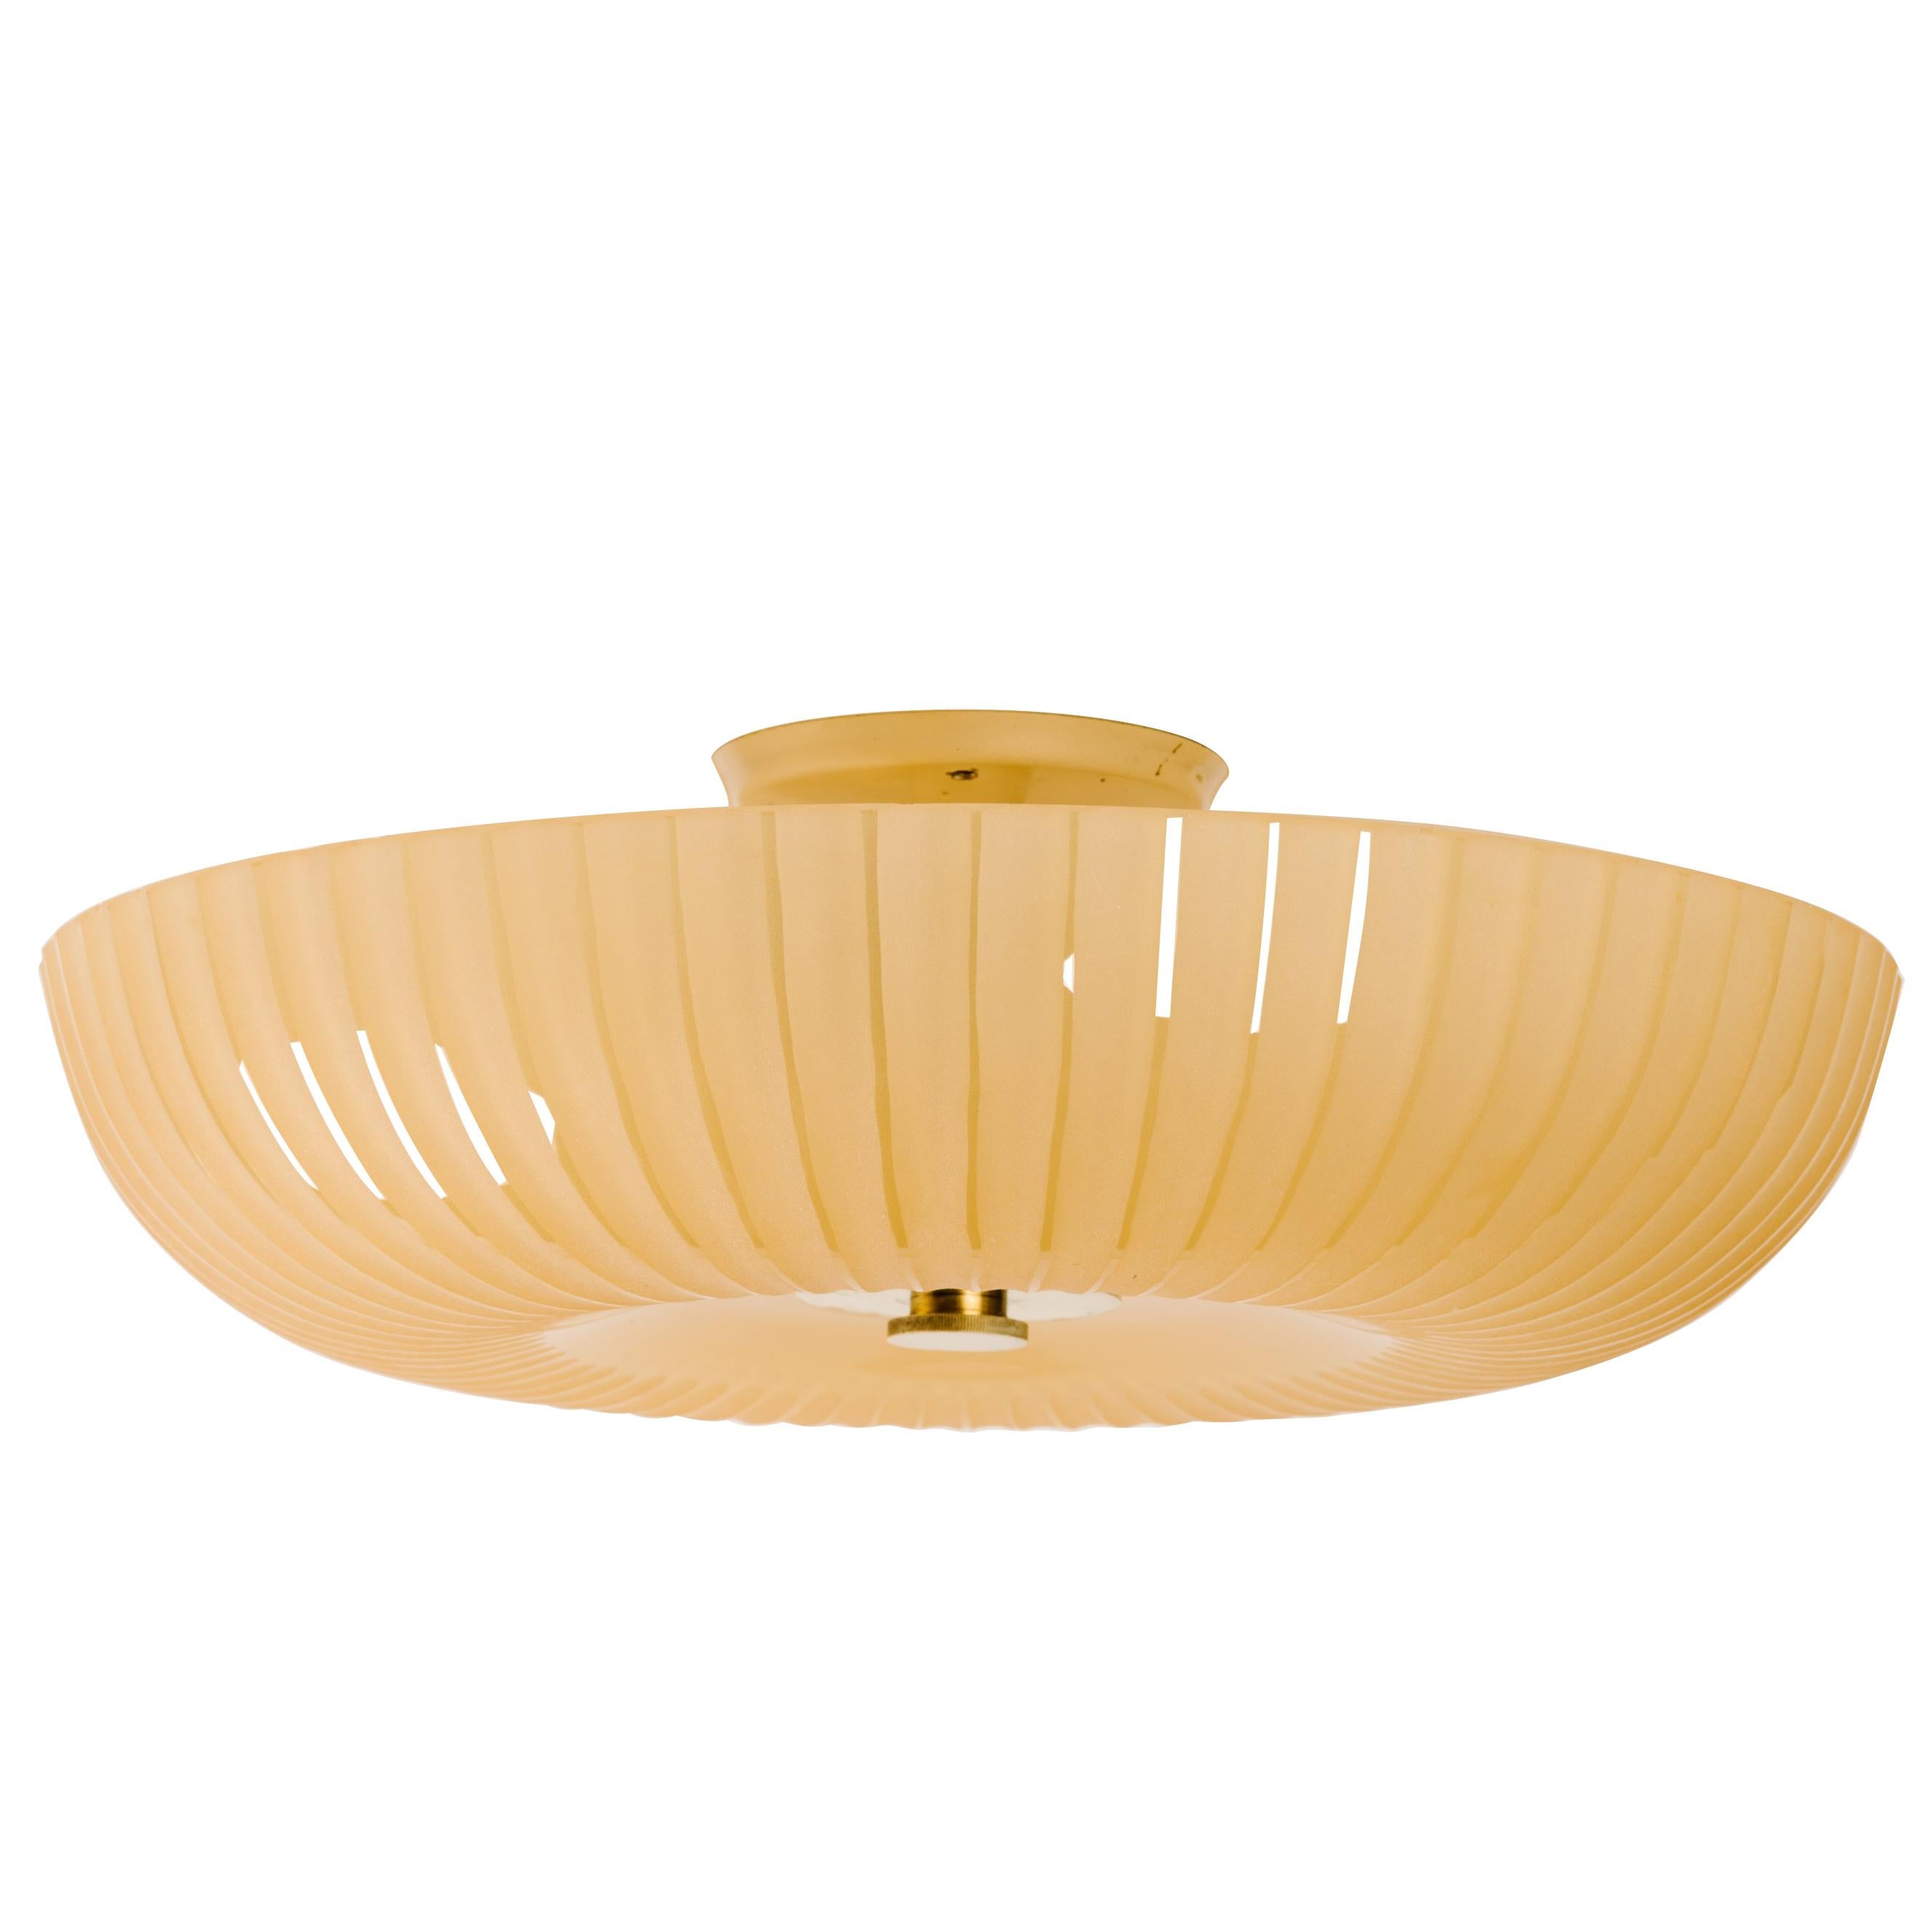 Rare Mid-Century Modern amber glass flush mount. Large sand blasted frosted glass dome with fluted details. The chandelier has patinated brass fittings and enameled metal light sockets. Fitted with three lights. Large circular ceiling plate in ivory